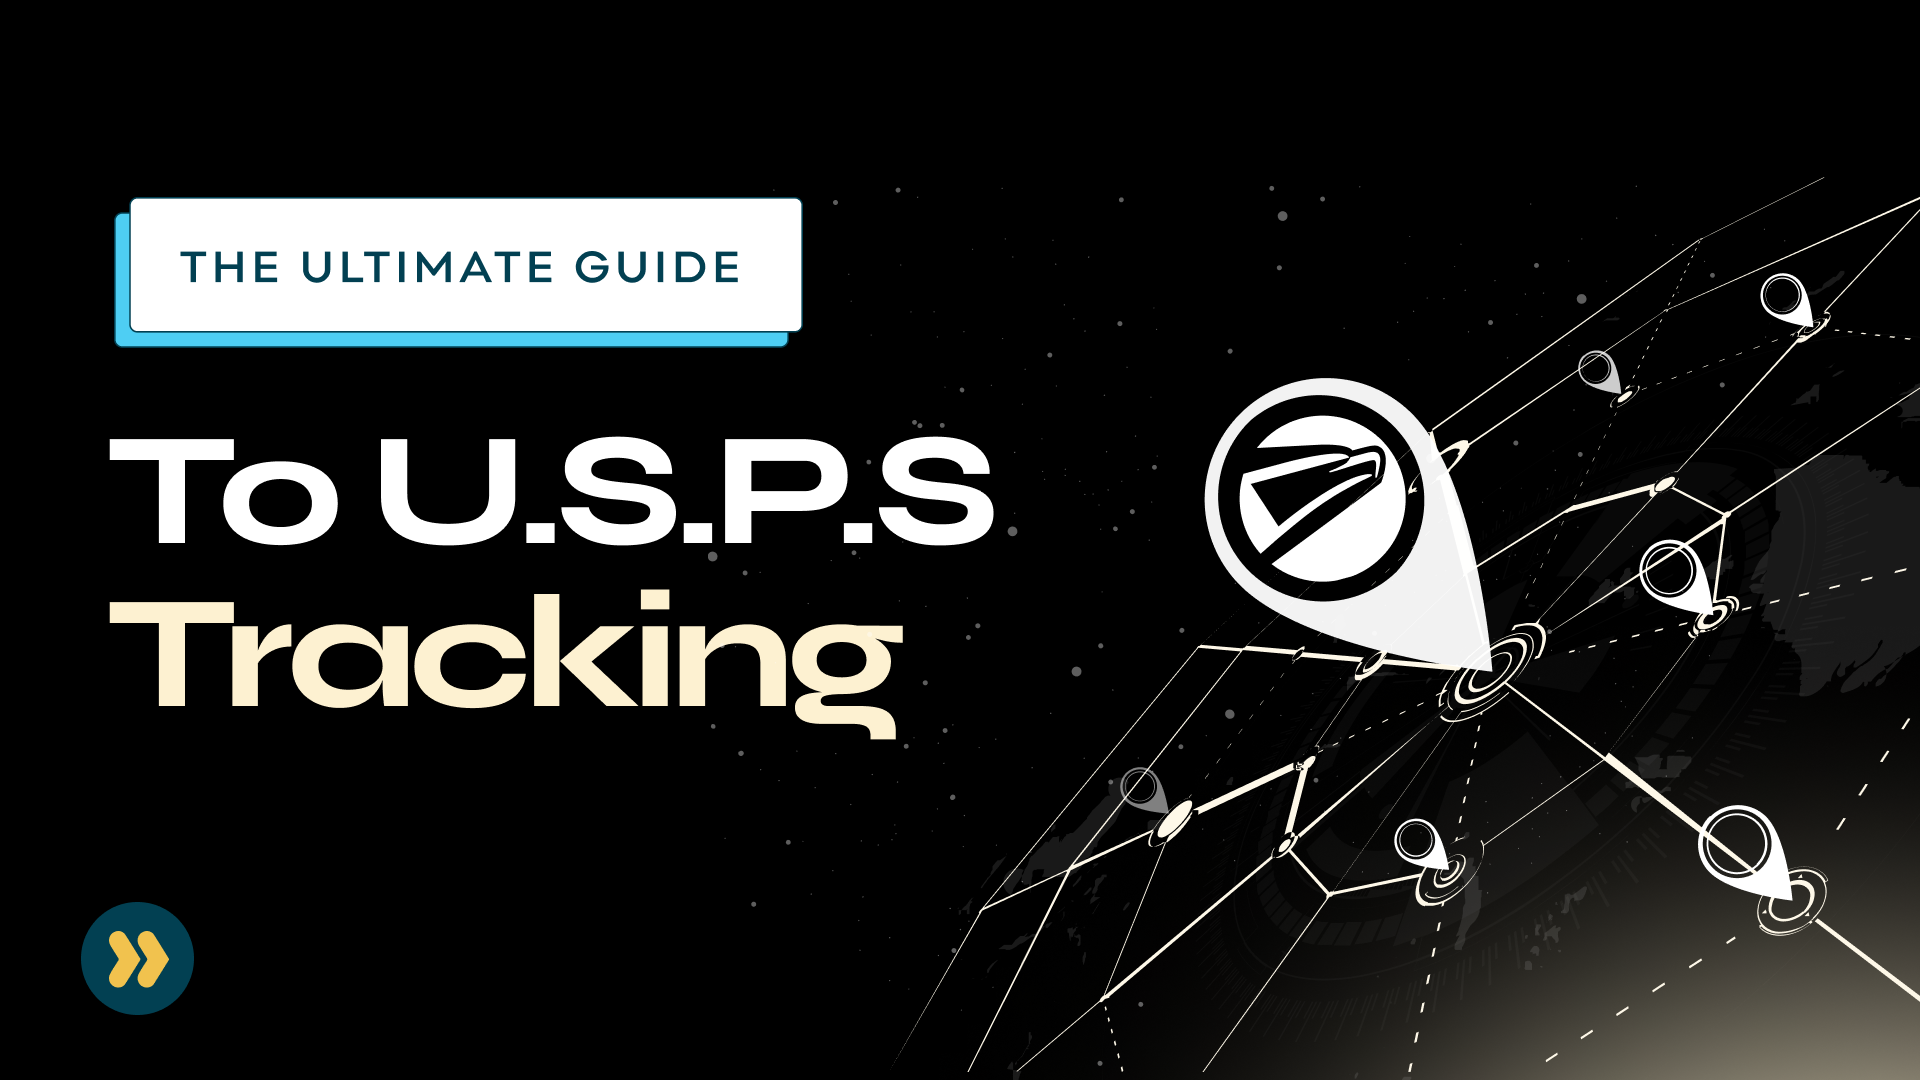 The Ultimate Guide to USPS Tracking